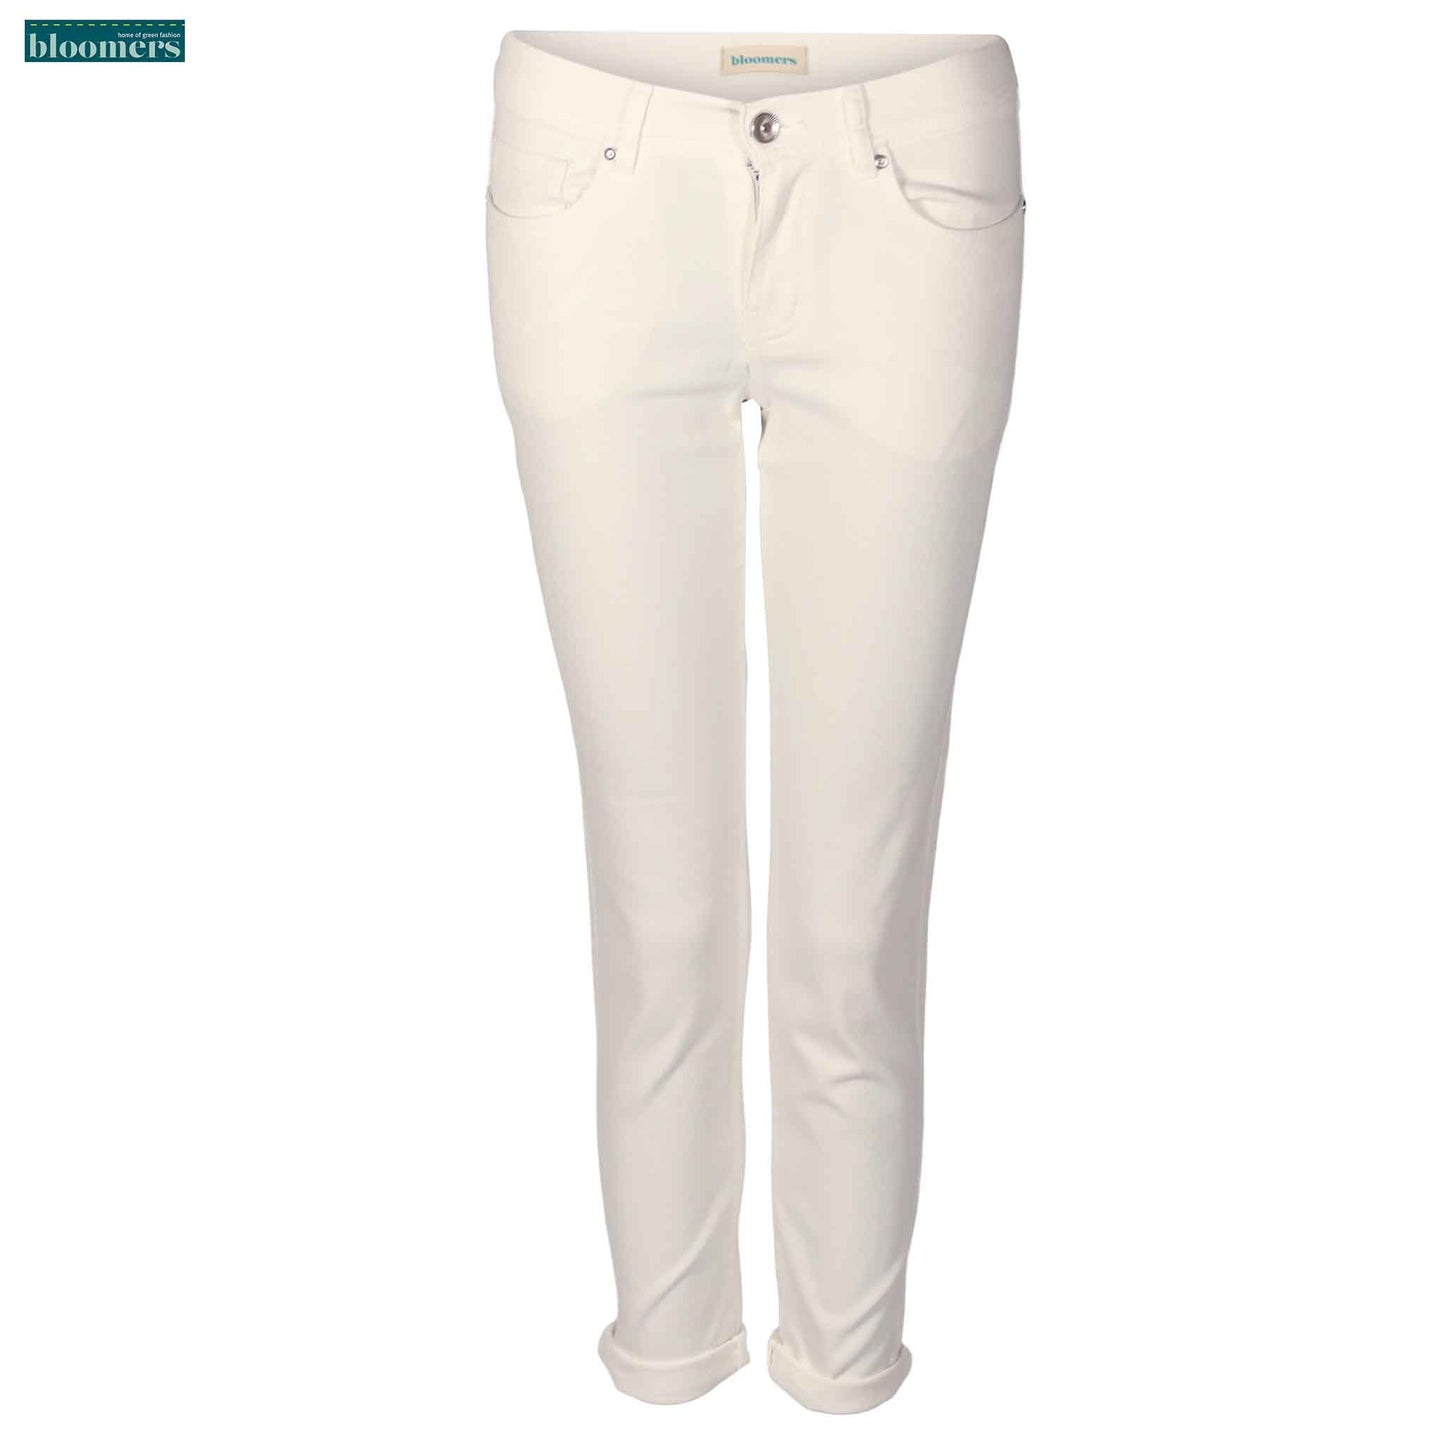 fashion tall woman bloomers jeans anni white